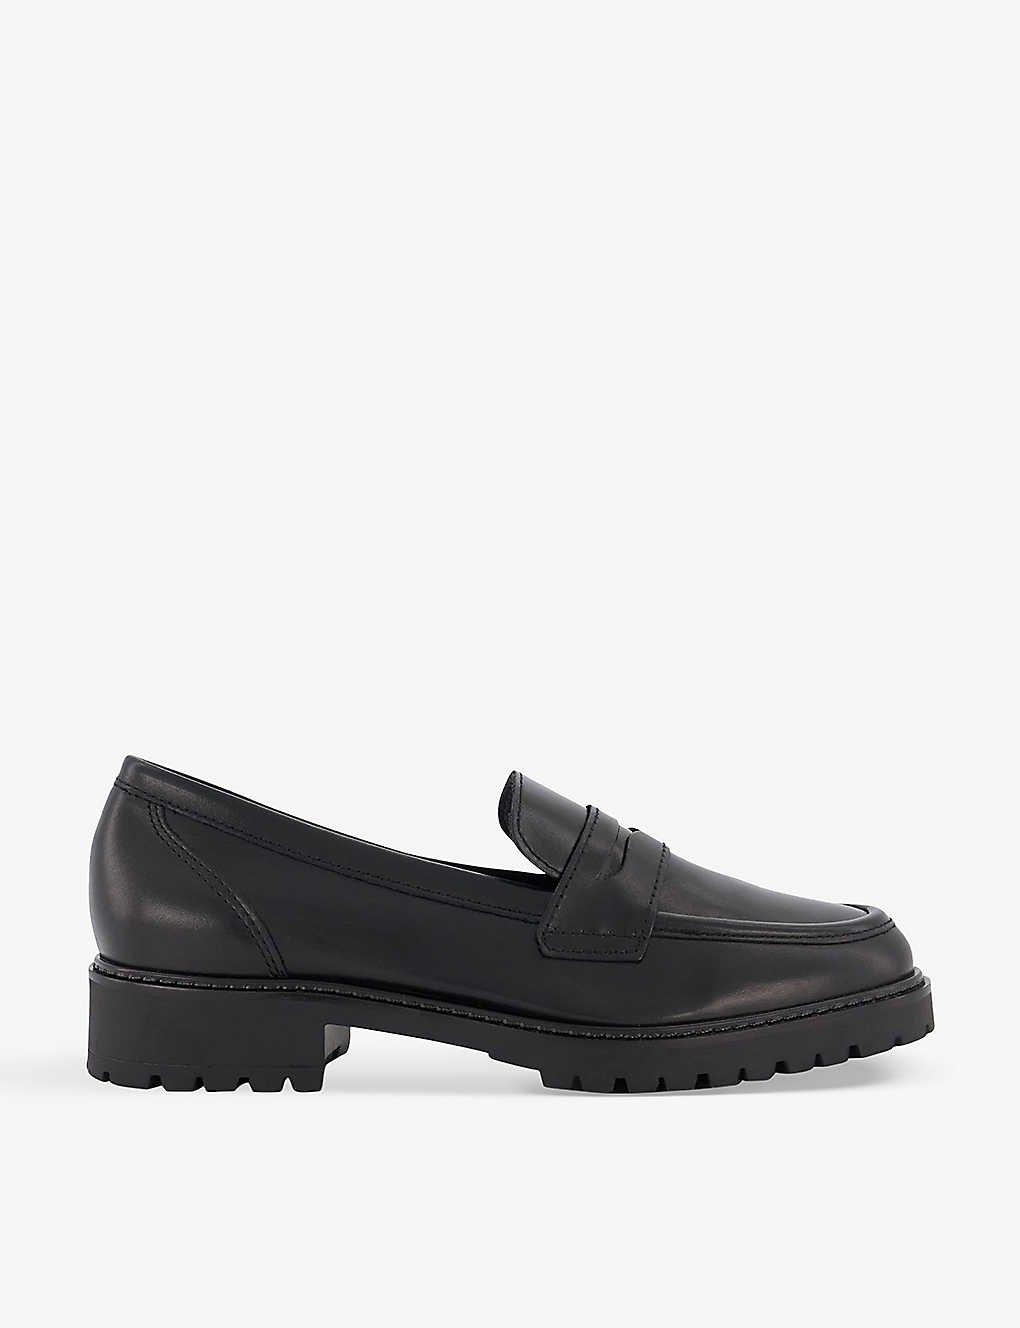 Dune Womens Black-leather Cleated-sole Leather Penny Loafer